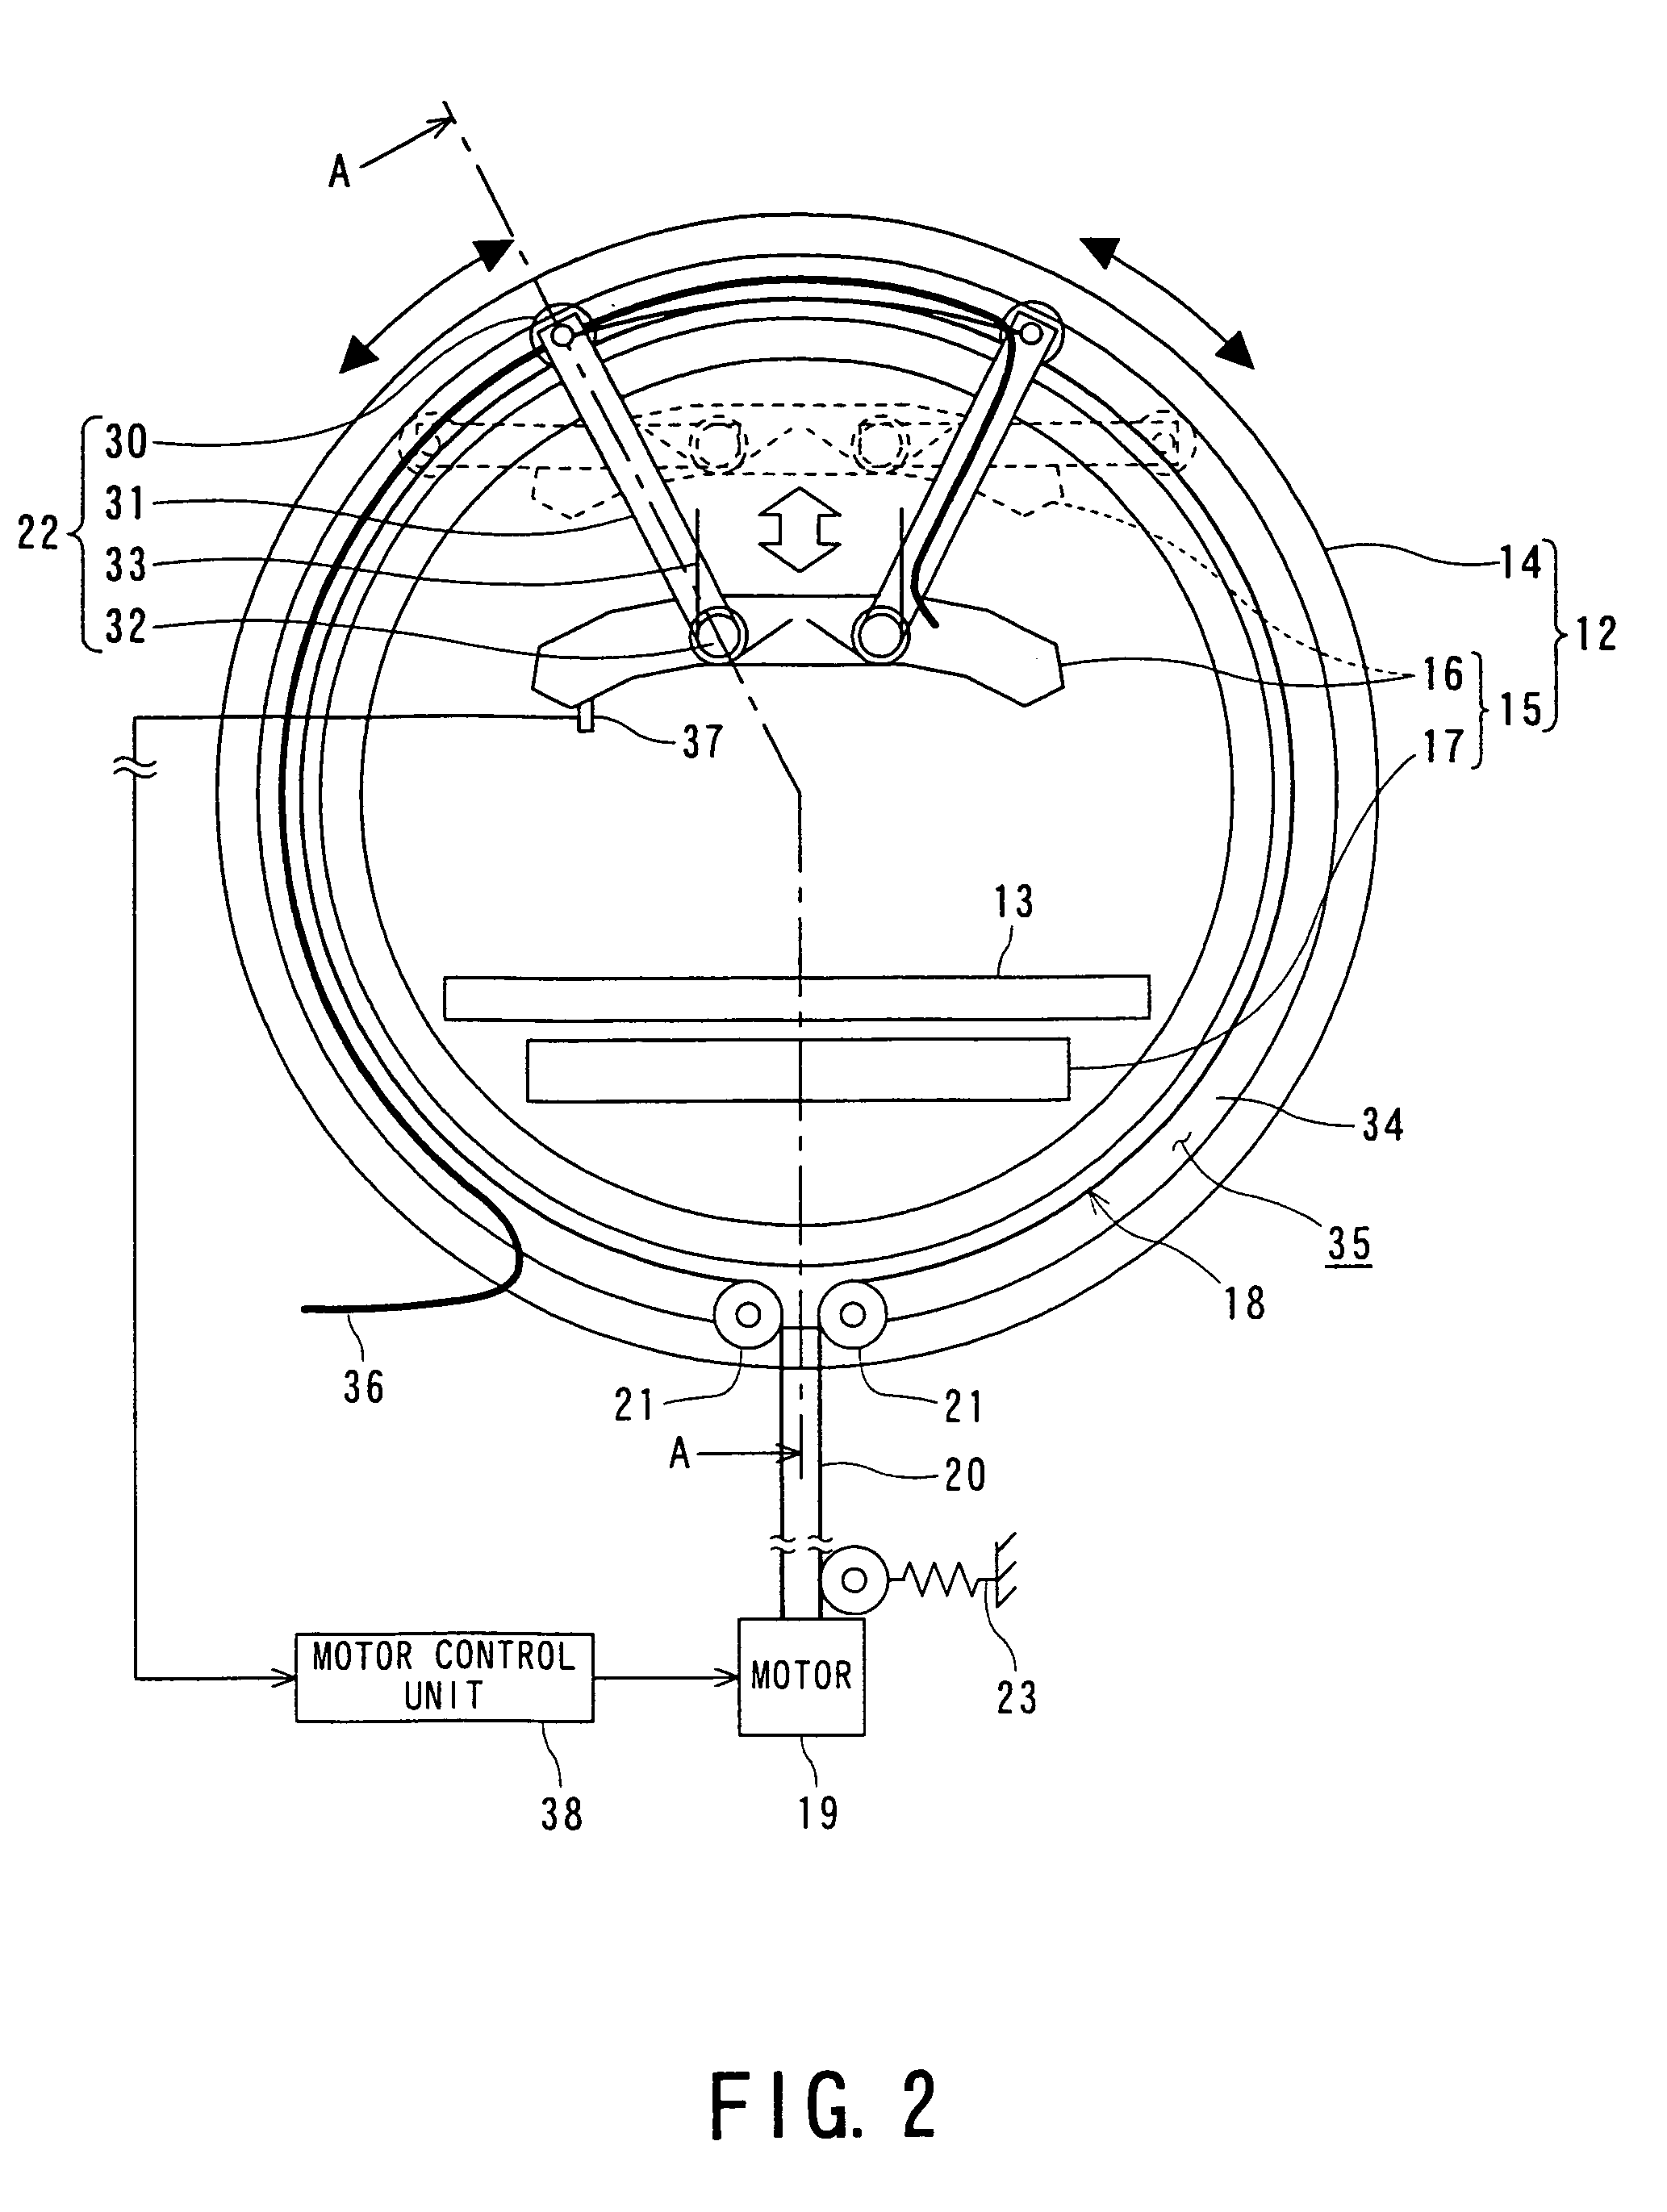 Magnetic resonance imaging apparatus with a movable RF coil having a controllable distance between the movable RF coil and an imaged body surface